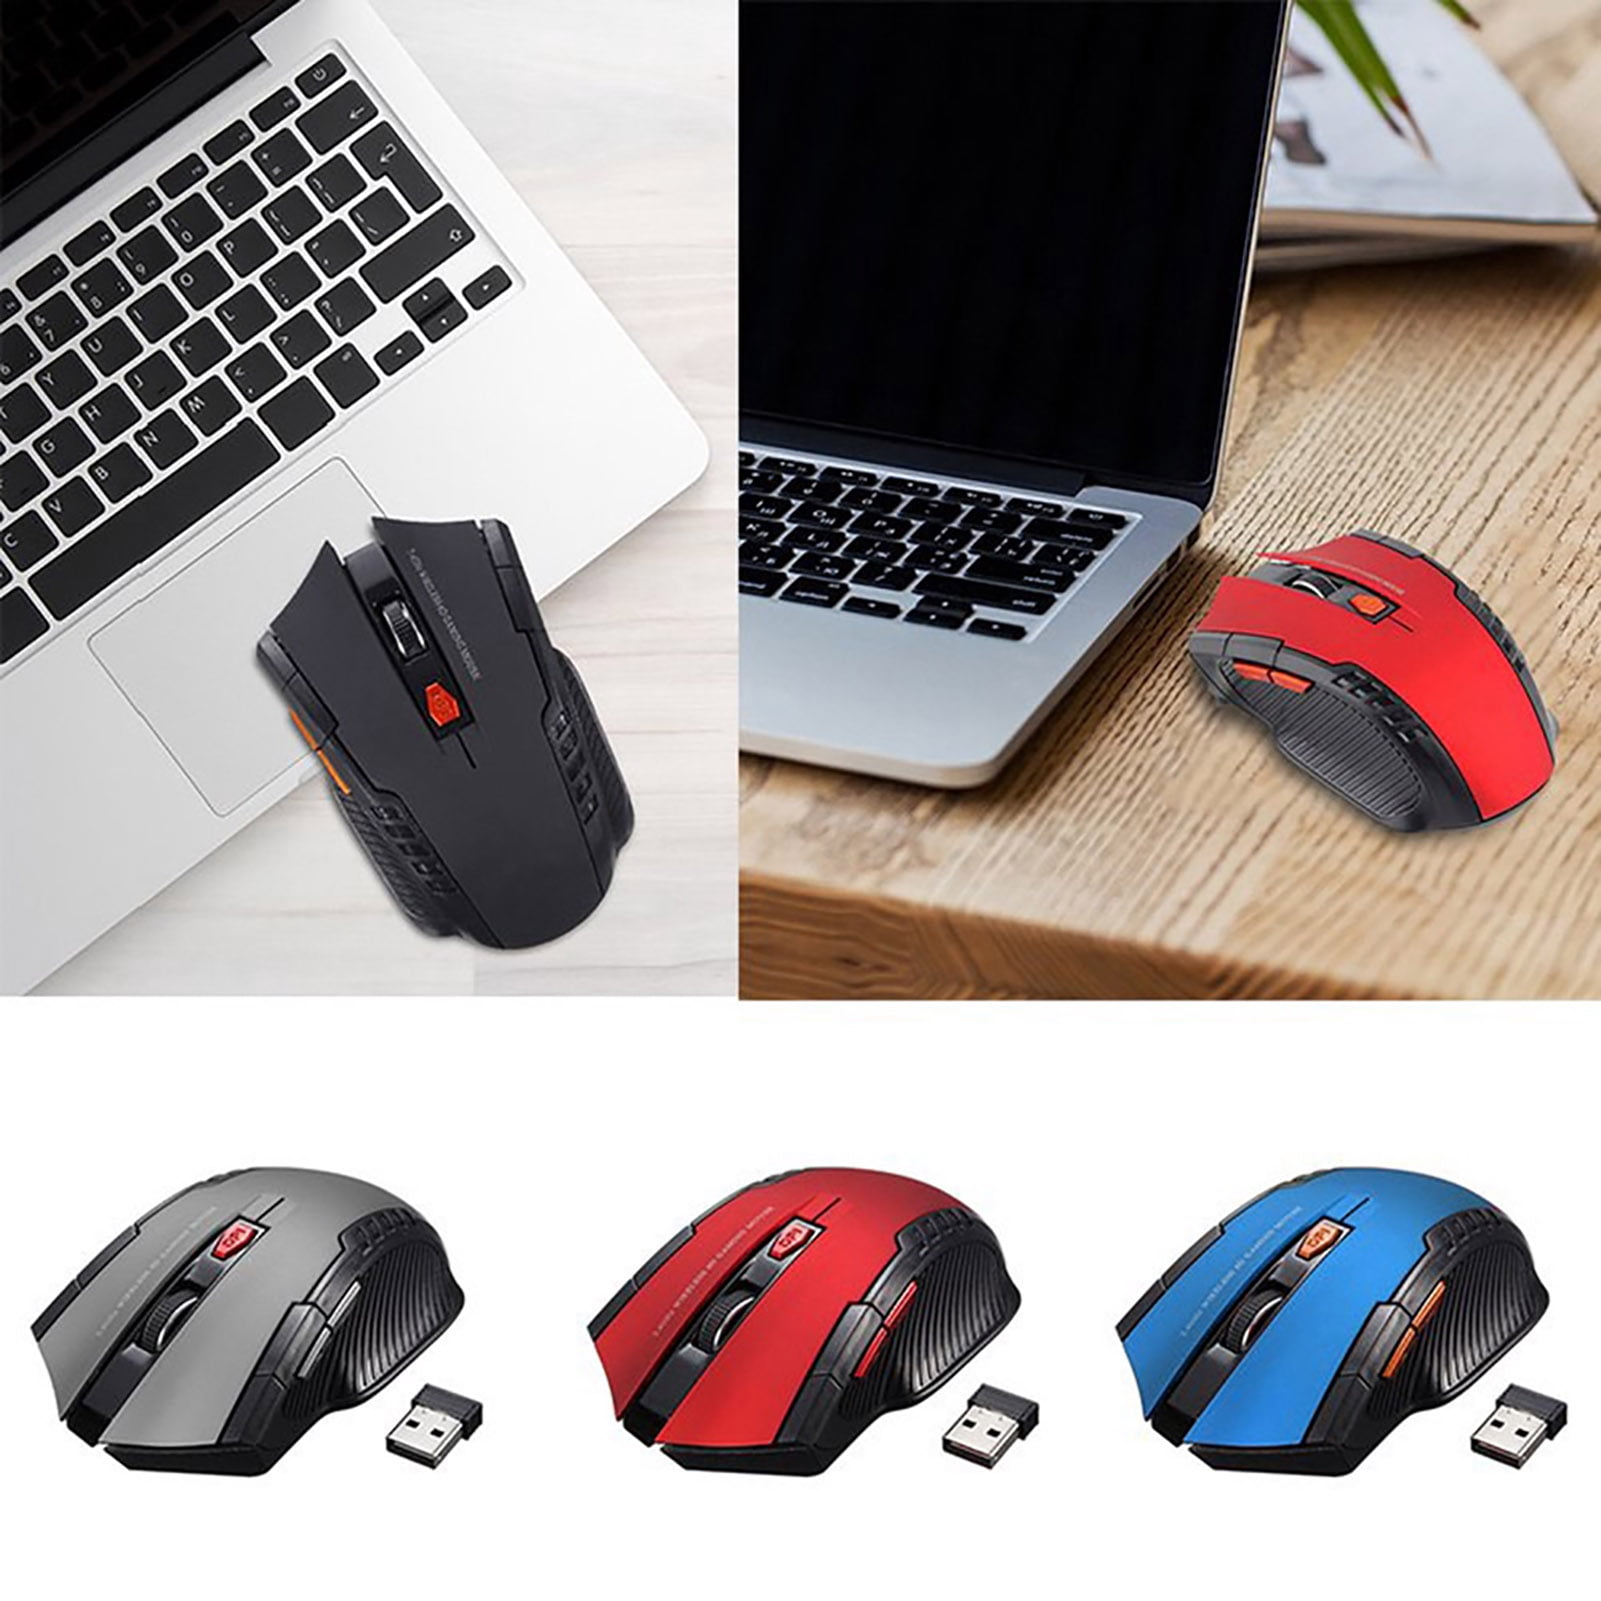 2.4GHz 6 Keys USB Wireless Optical Gaming Mouse Mice For Computer PC Laptop NEW 